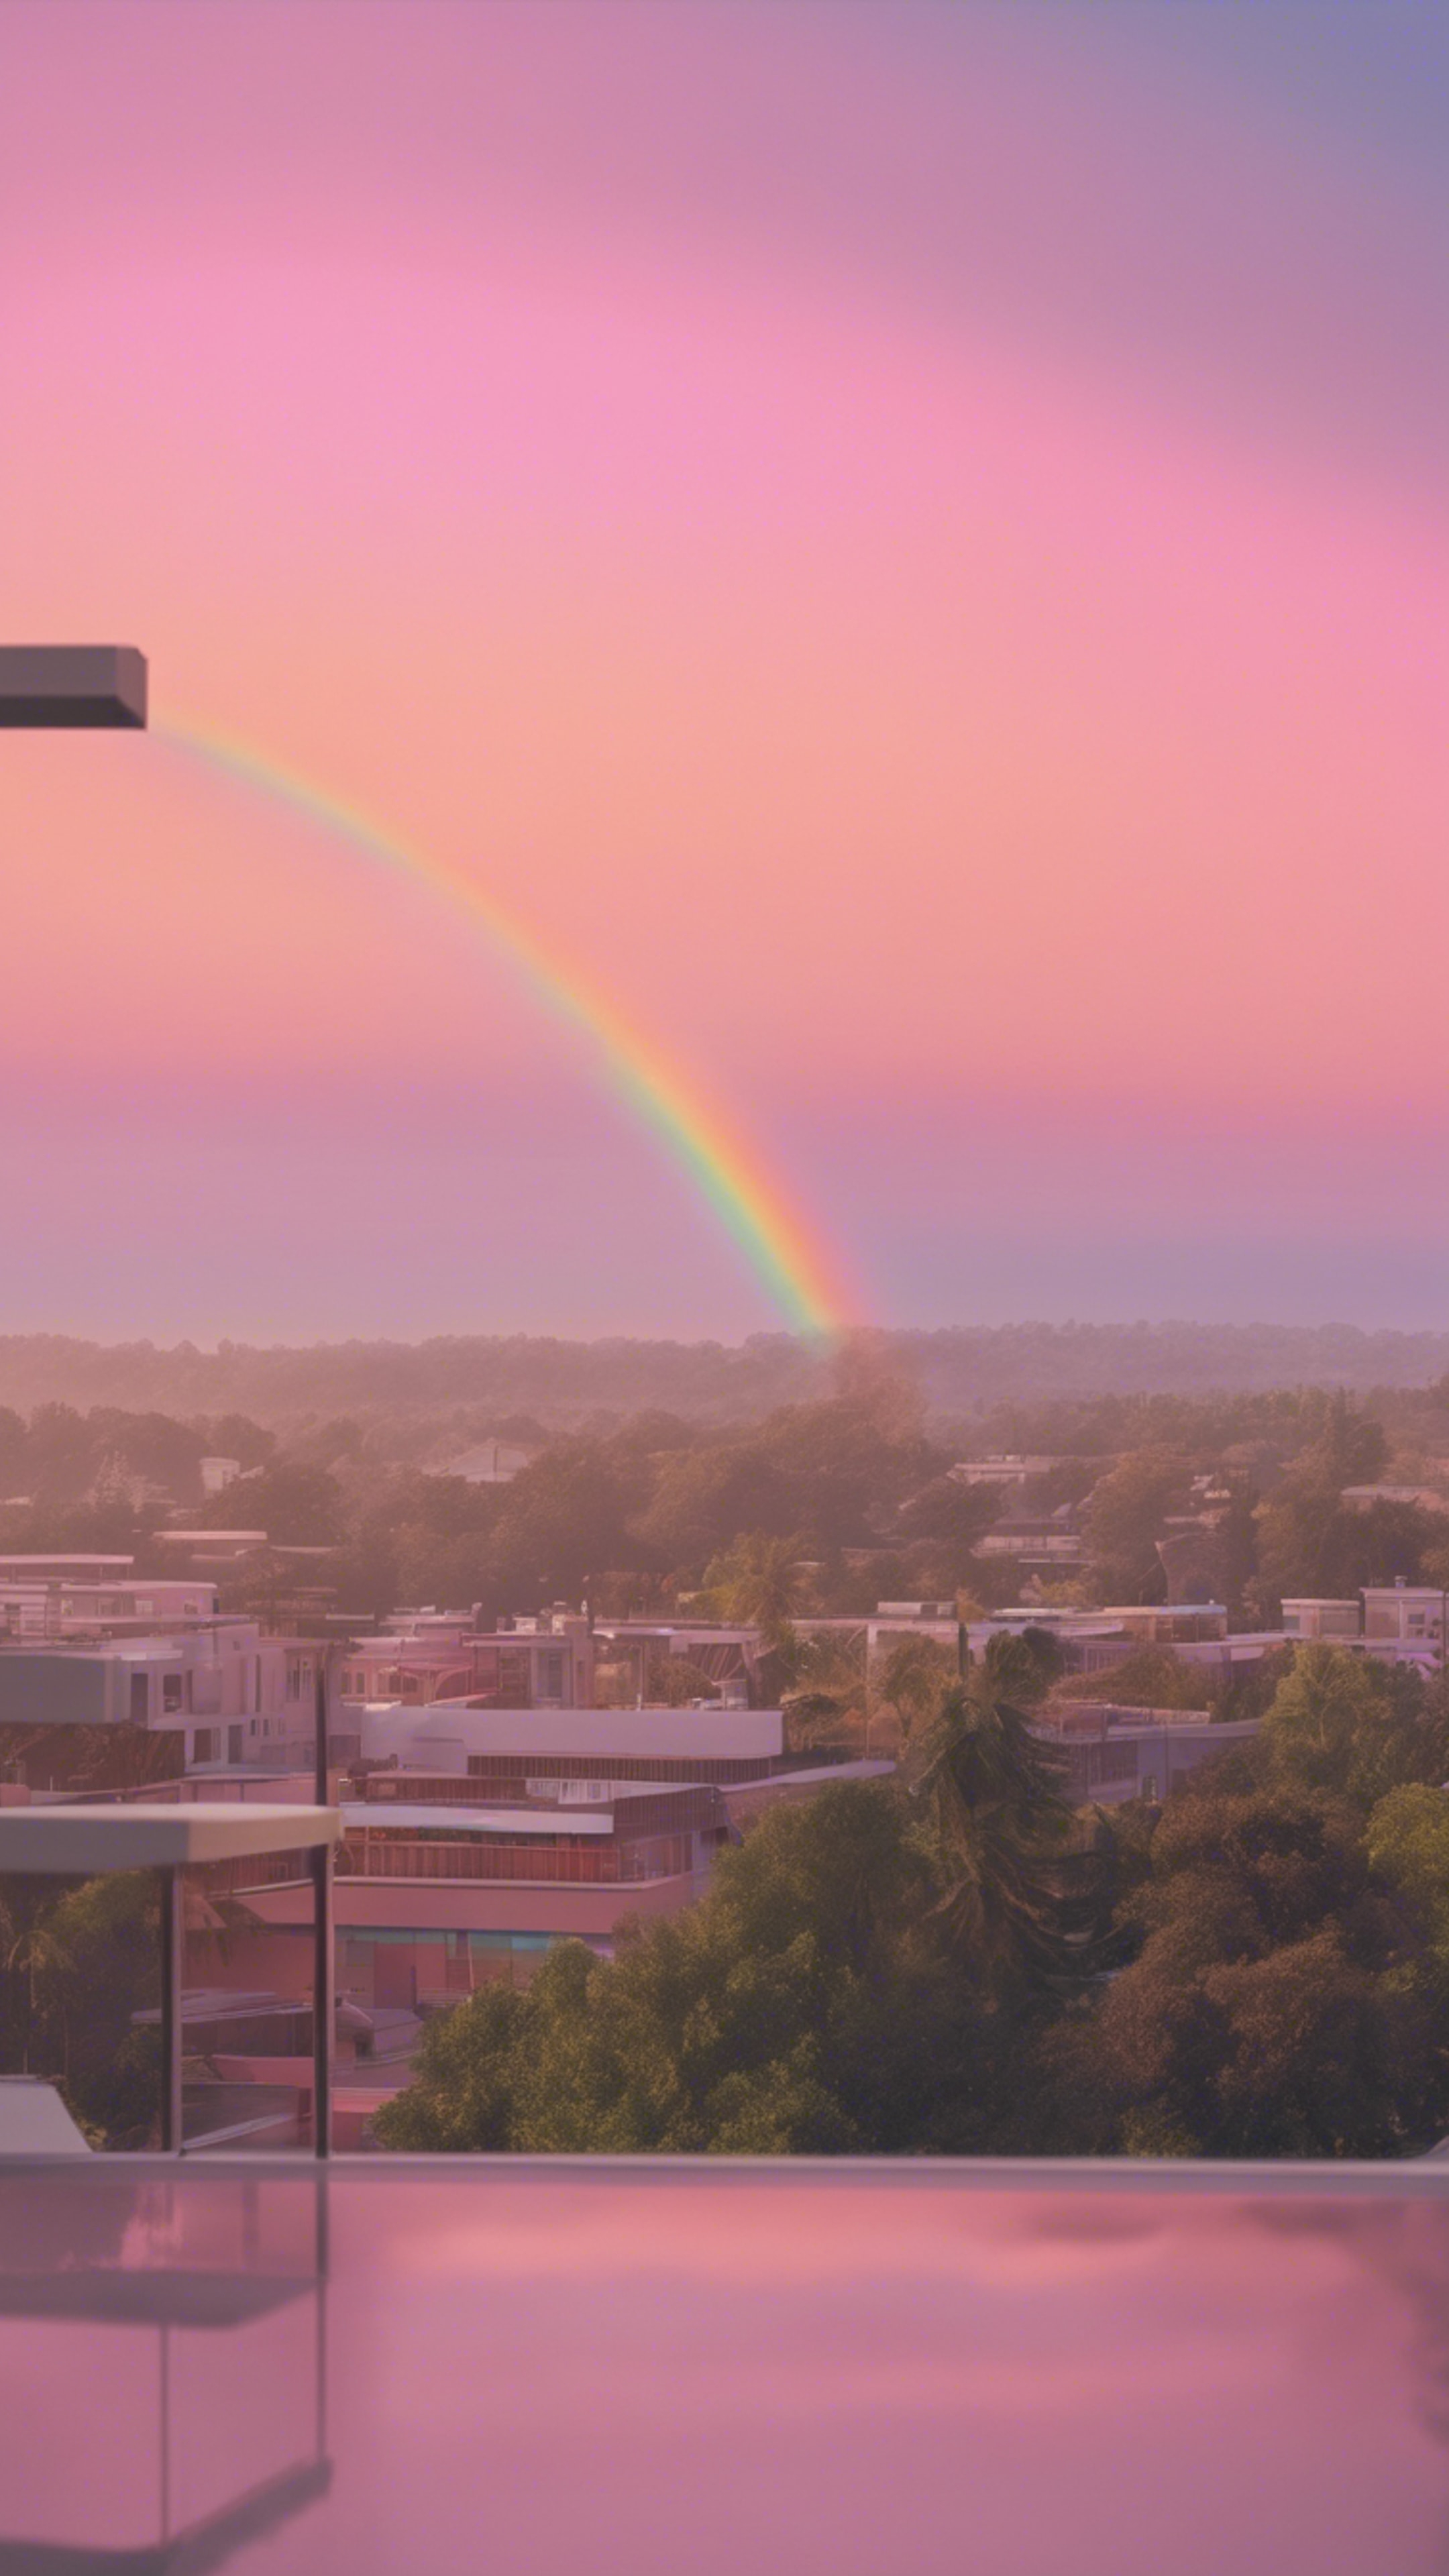 A window view of a soft pastel rainbow against a pink sunset sky. Wallpaper[3dccbf8771ca4ee4b62f]